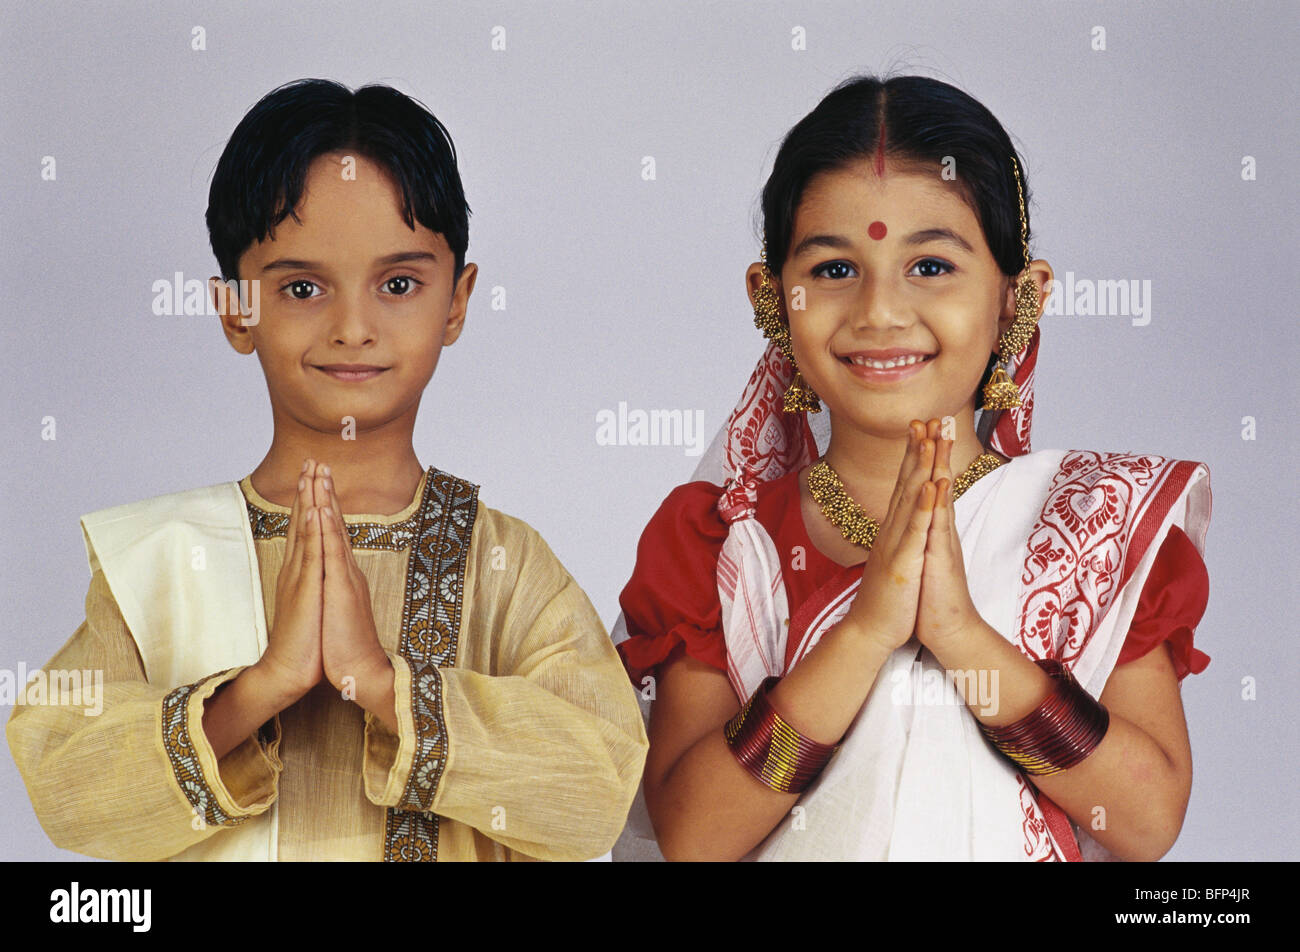 vda 63647 boy and girl dressed as bengali couple in welcome pose mr502501 BFP4JR